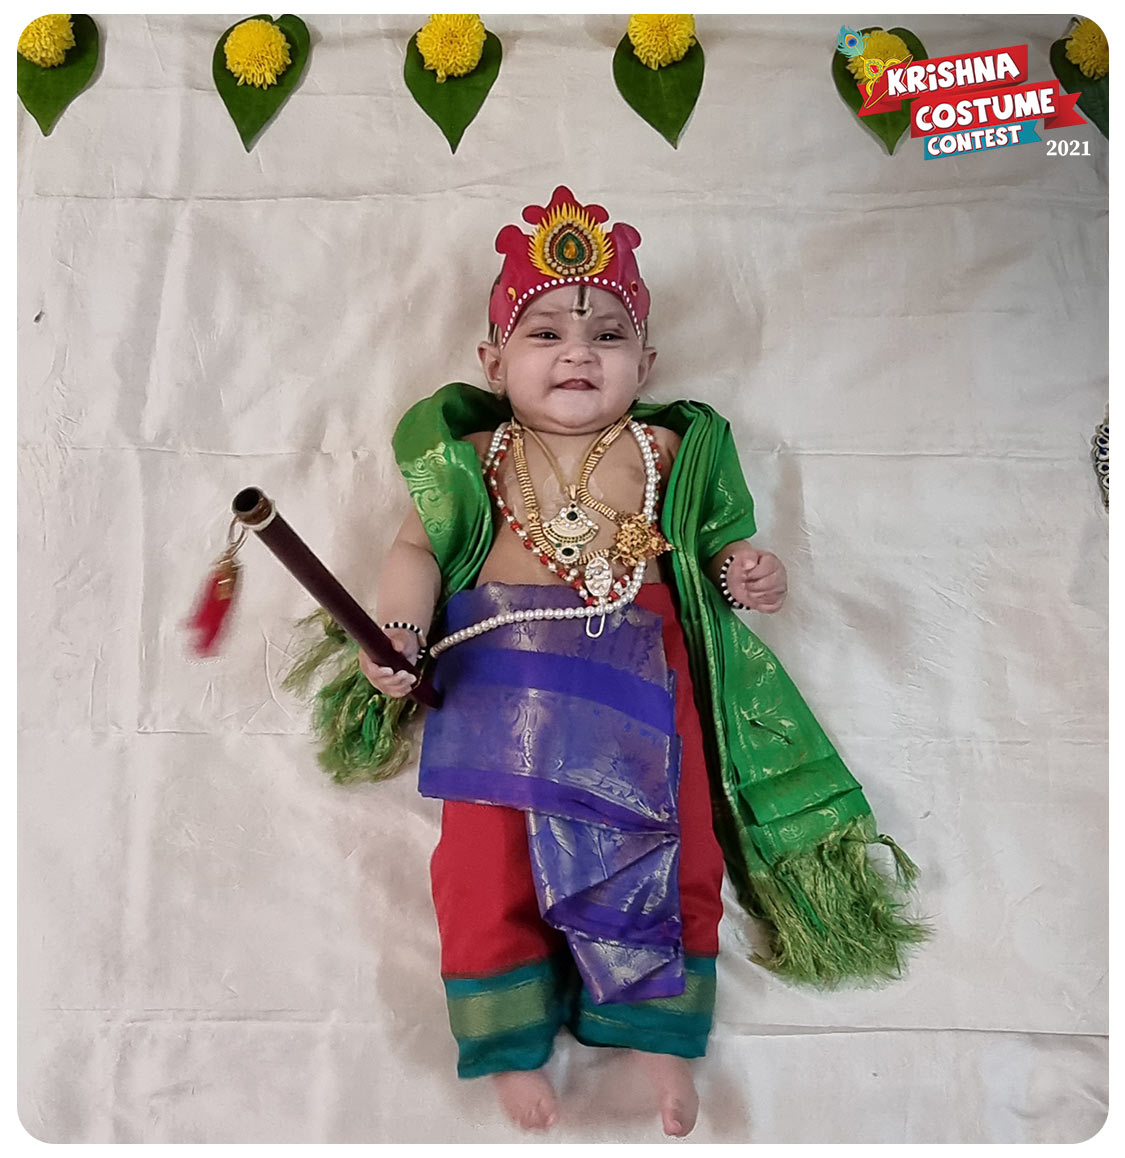 Buy Fancy Agents Lord Krishna Costume for Kids| Baby Krishna Dress for  Janmashtami| Fancy Dress Costume for Baby Boys/Girls| Krishna Dress for  Kids without cummerbund (0-3 Months, Blue) Online at Low Prices